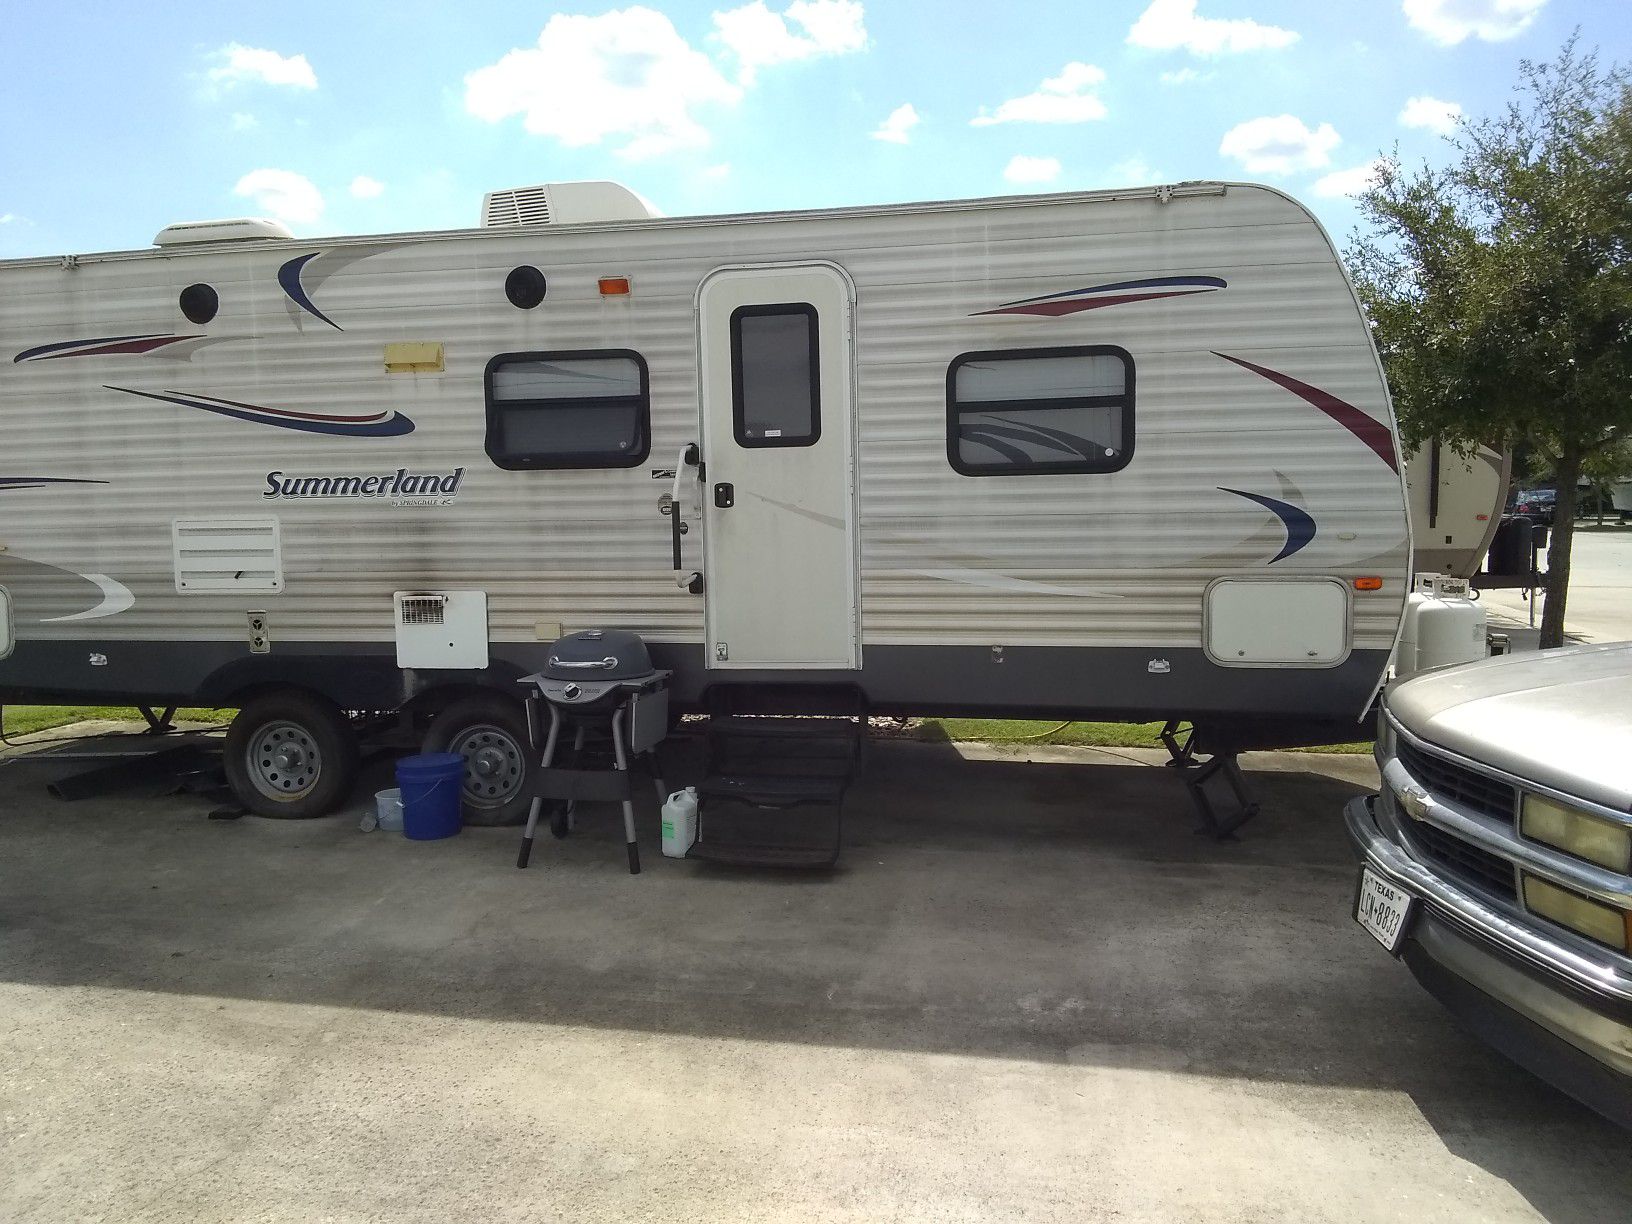 2013 Summerland RV, 27 ft with a slide out!!